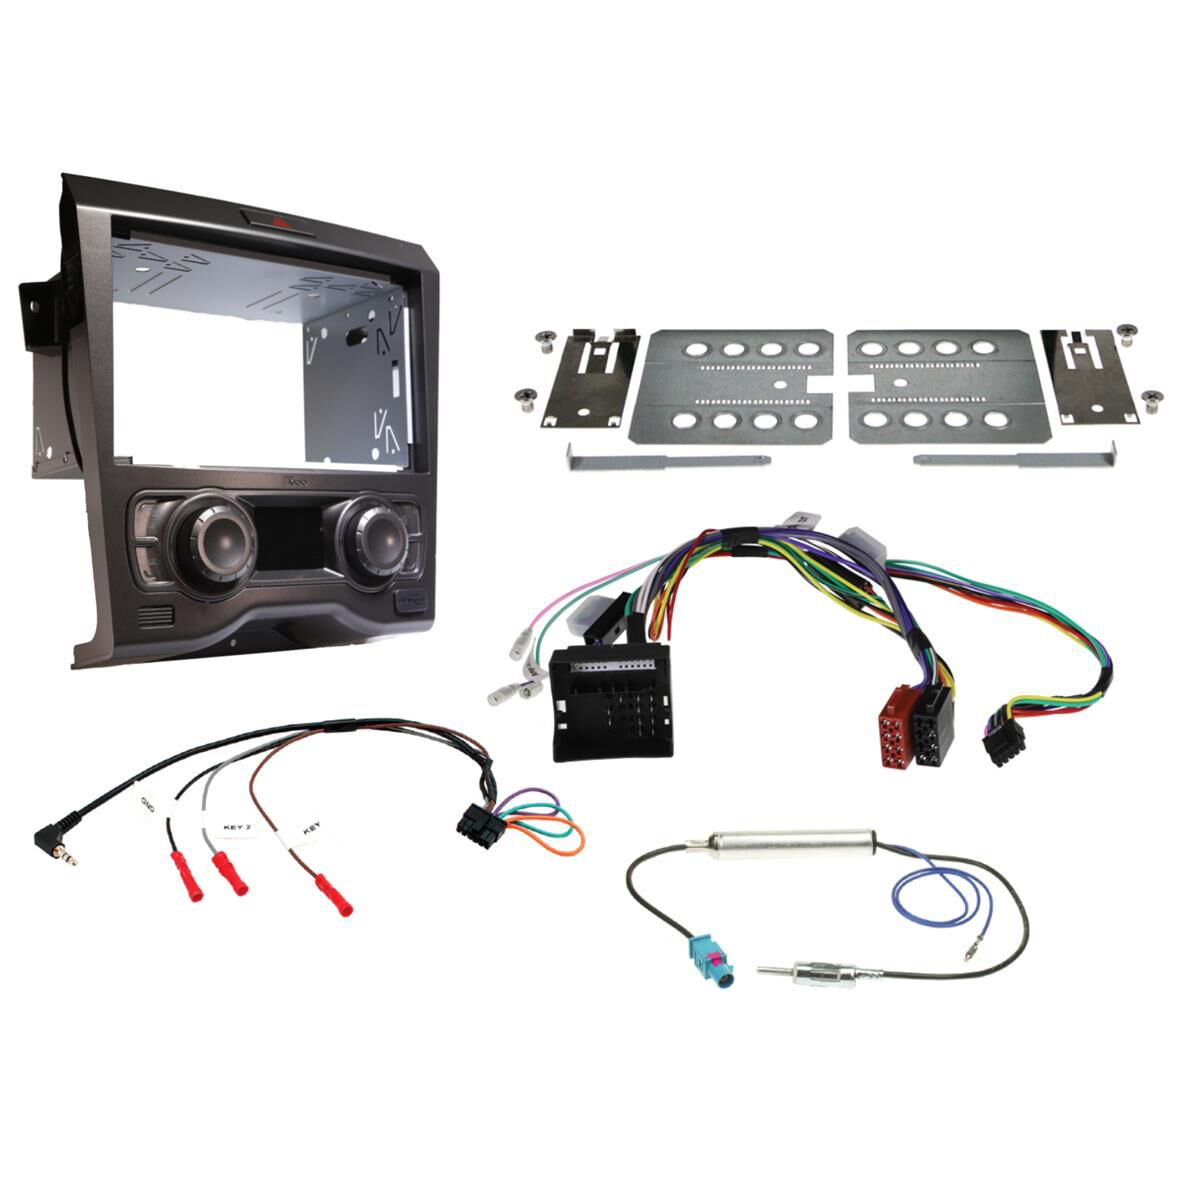 DOUBLE DIN INSTALL KIT TO SUIT HOLDEN COMMODORE VE SERIES 1 DUAL ZONE CLIMATE CONTROL (GUNMETAL GREY), , scaau_hi-res